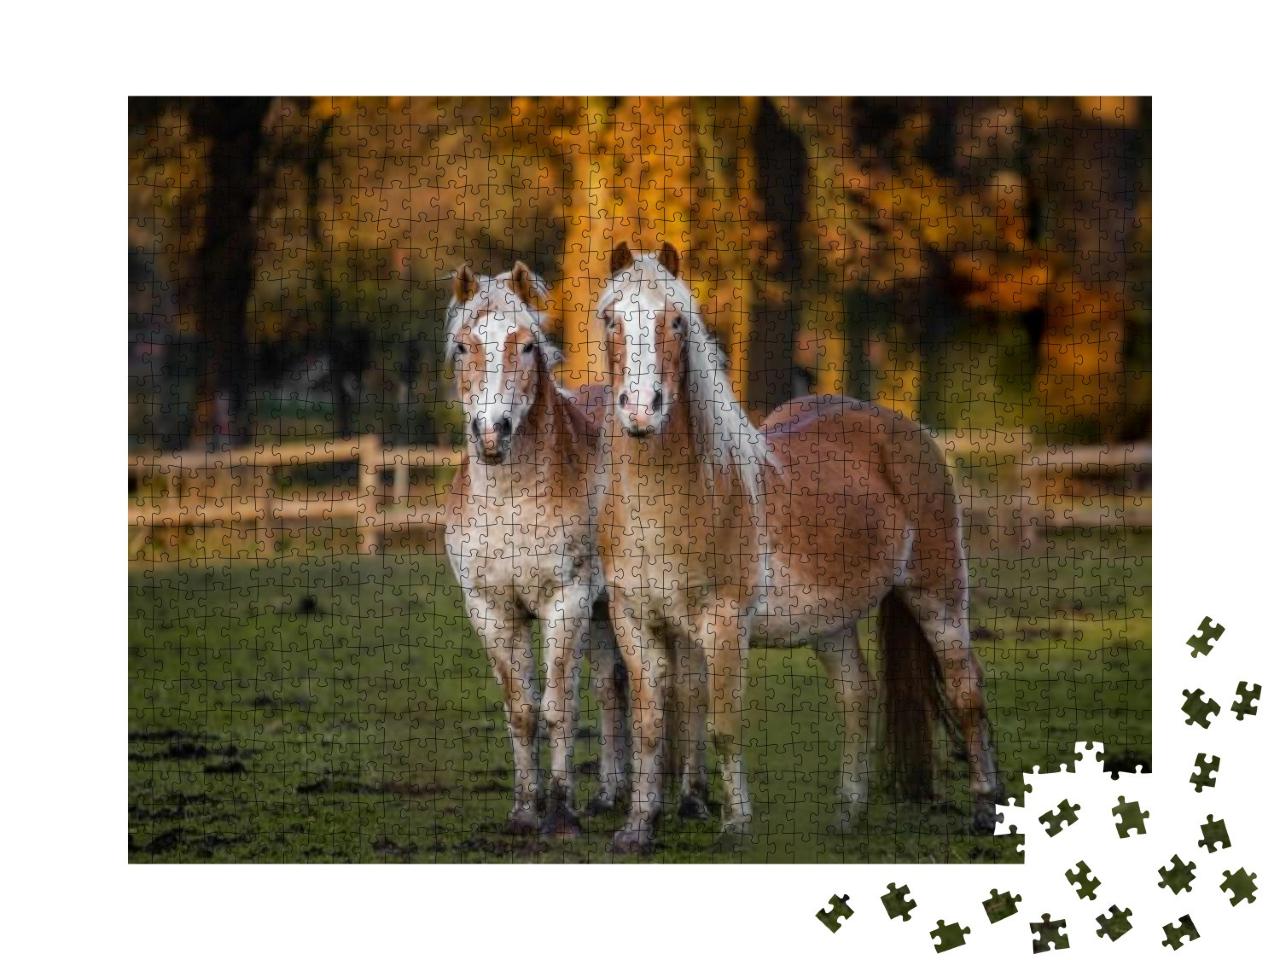 Two Horses Standing in Meadow with Autumn Background... Jigsaw Puzzle with 1000 pieces